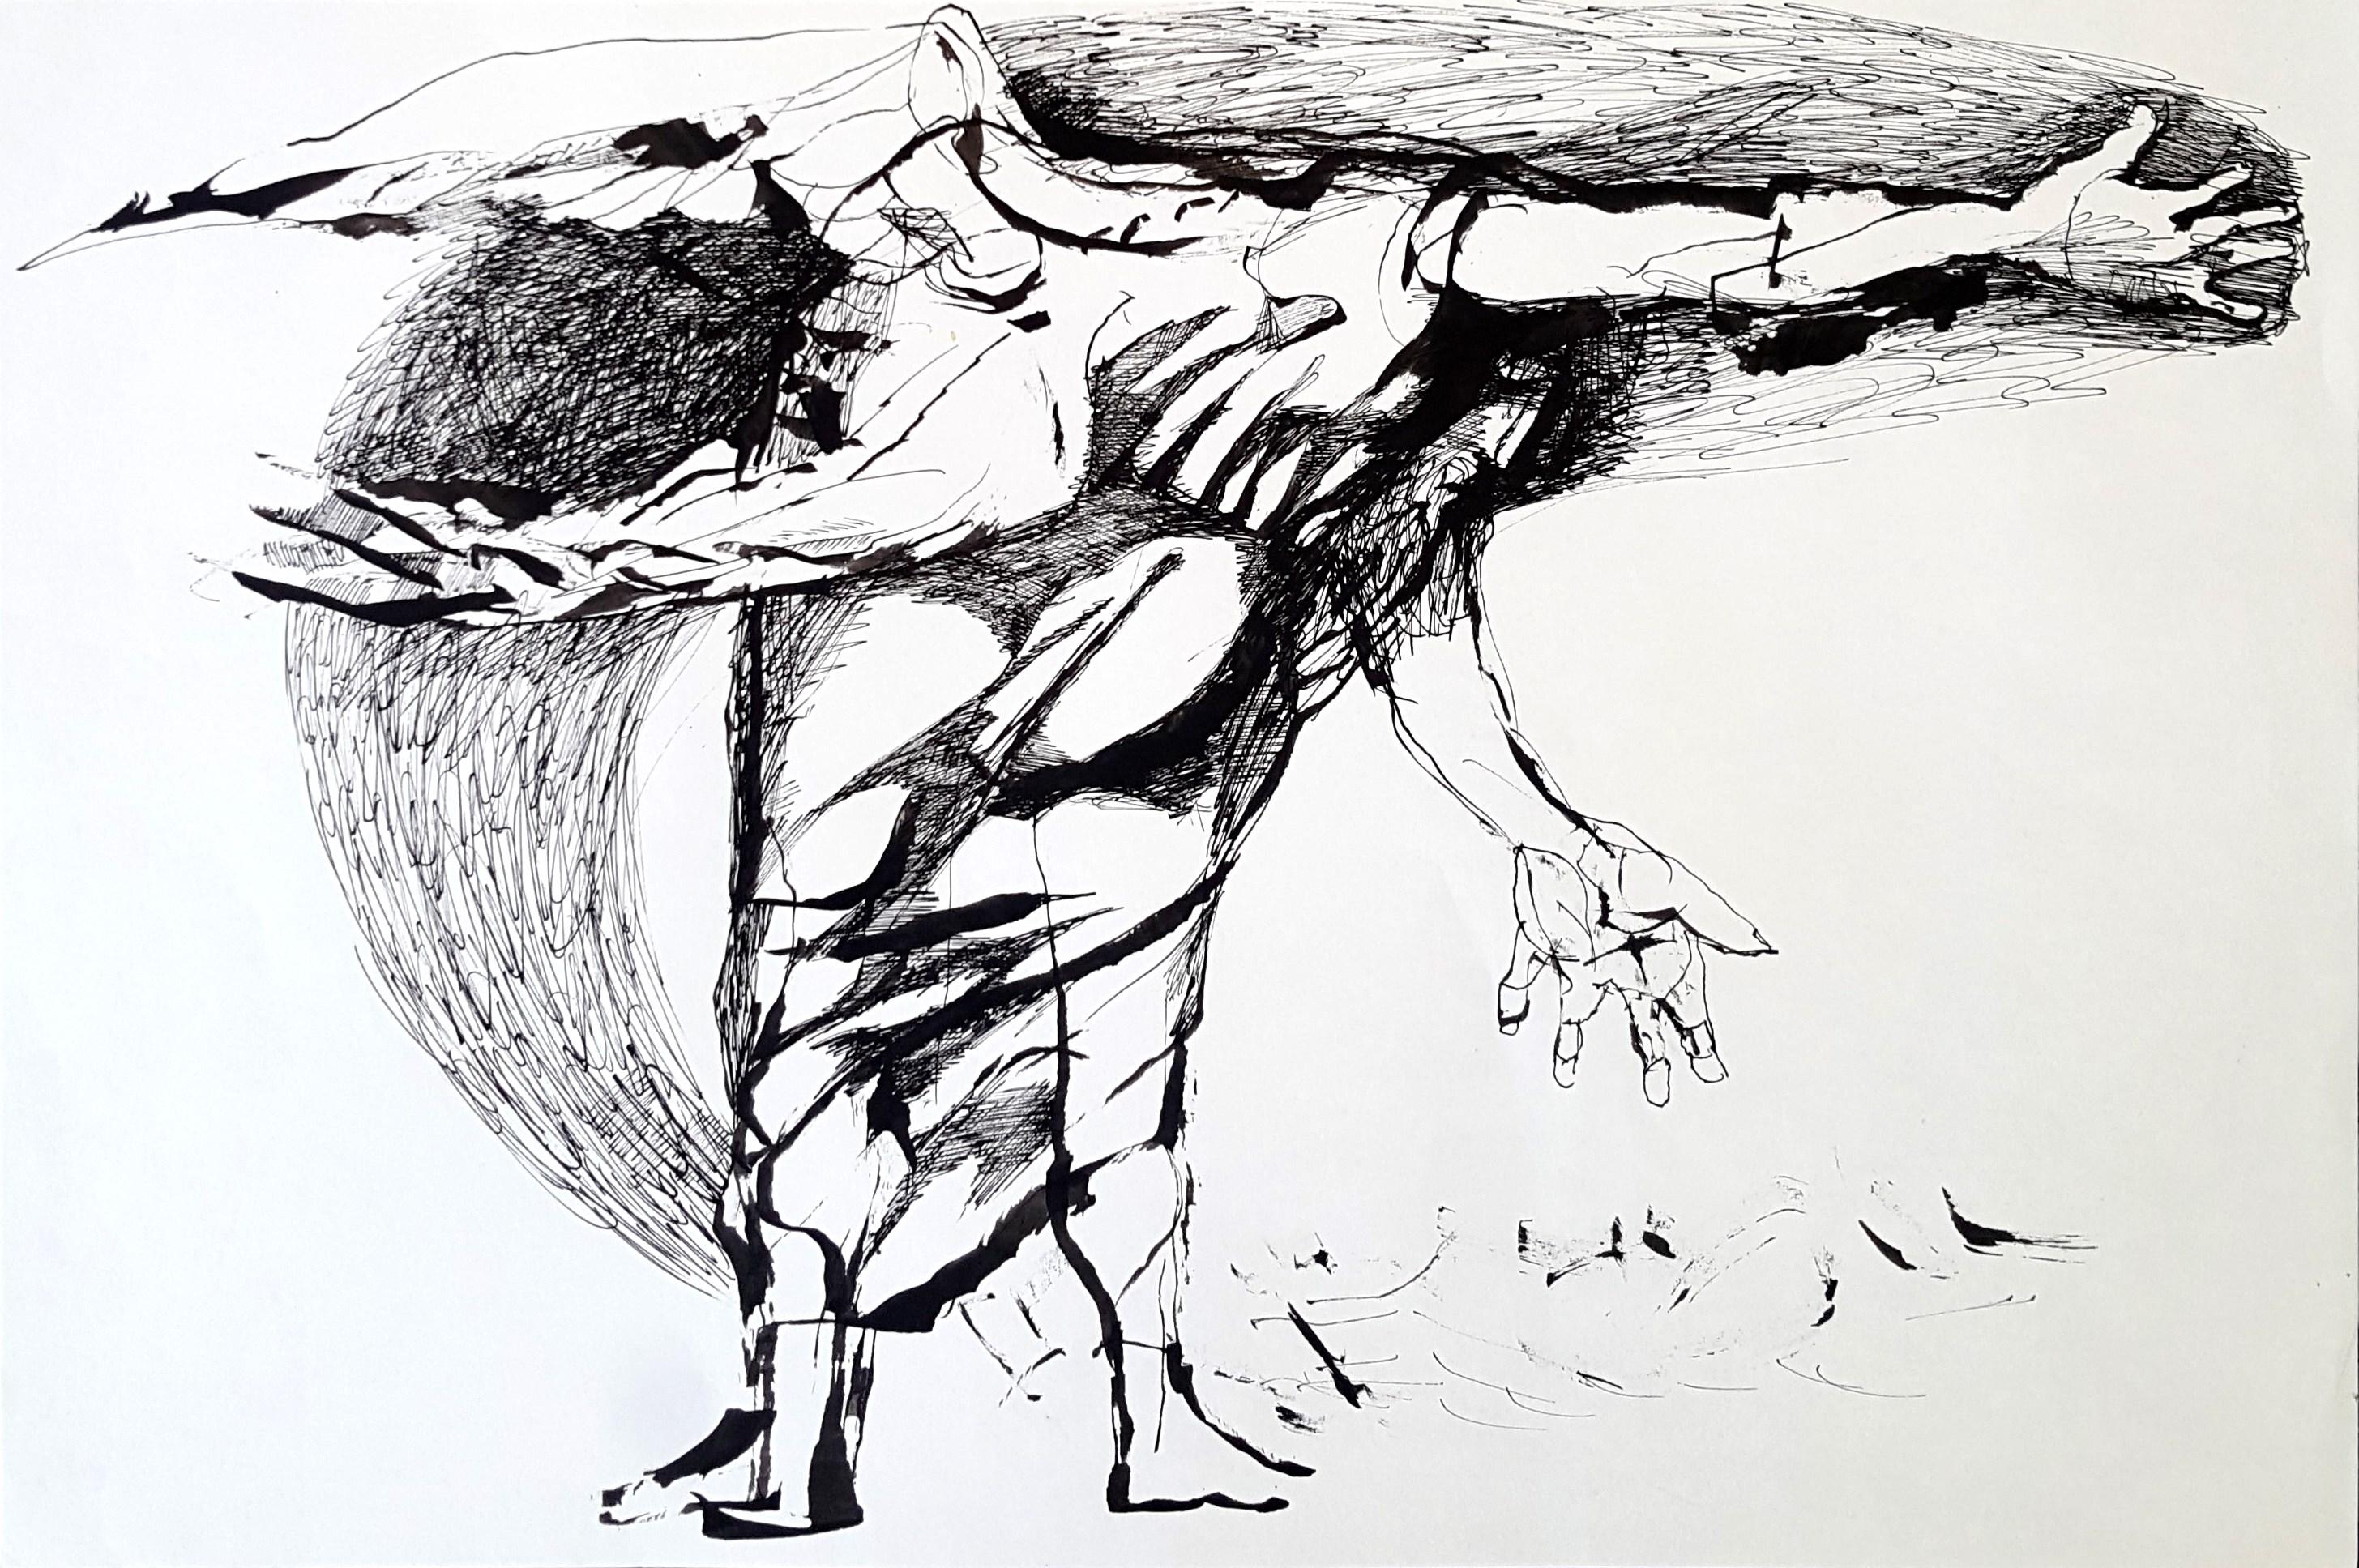 Icarus - Lajos Szalay, 20th Century, Figurative drawing